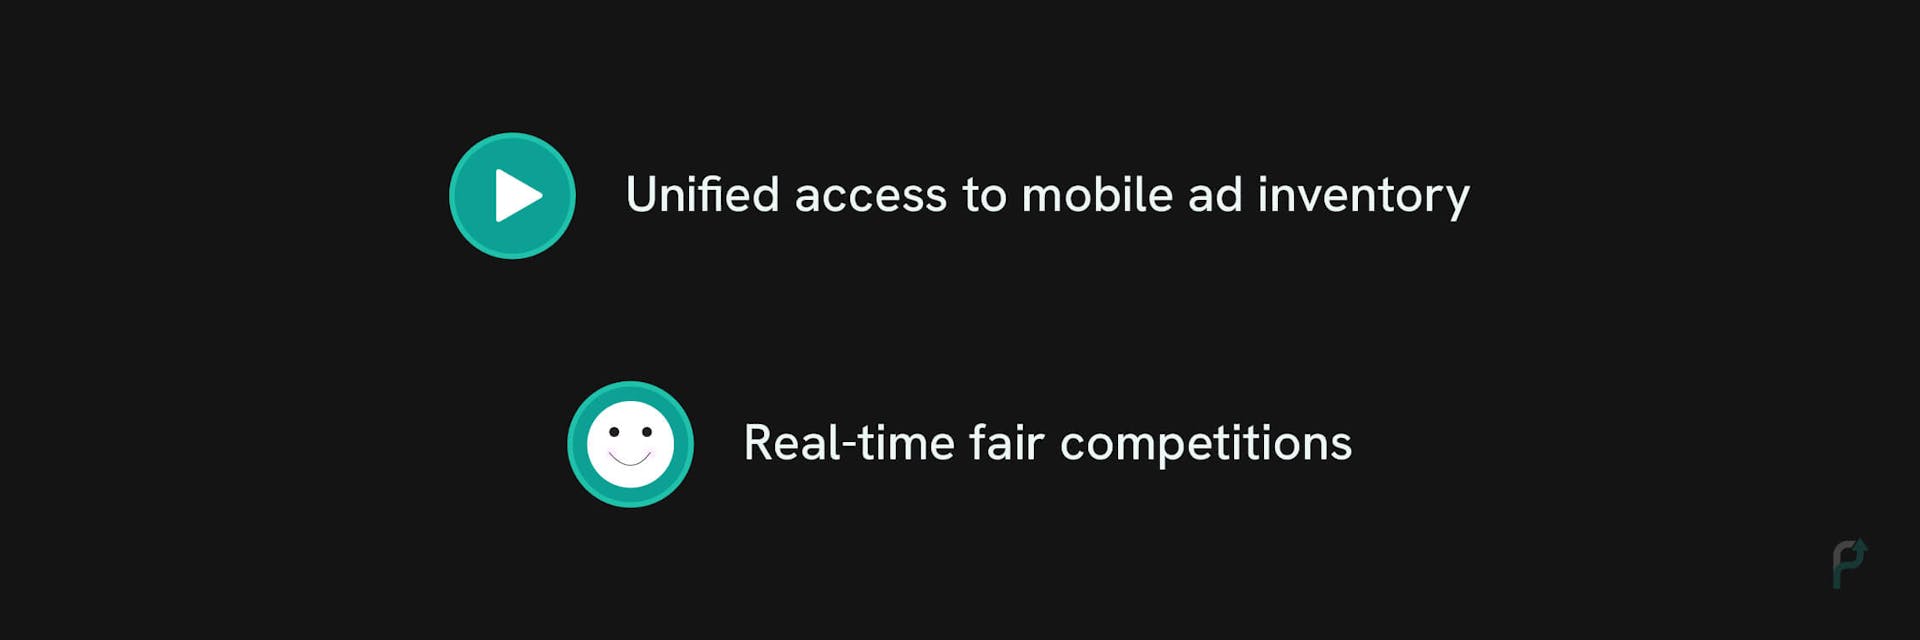 Benefits of In-app Unified Auction for Advertisers